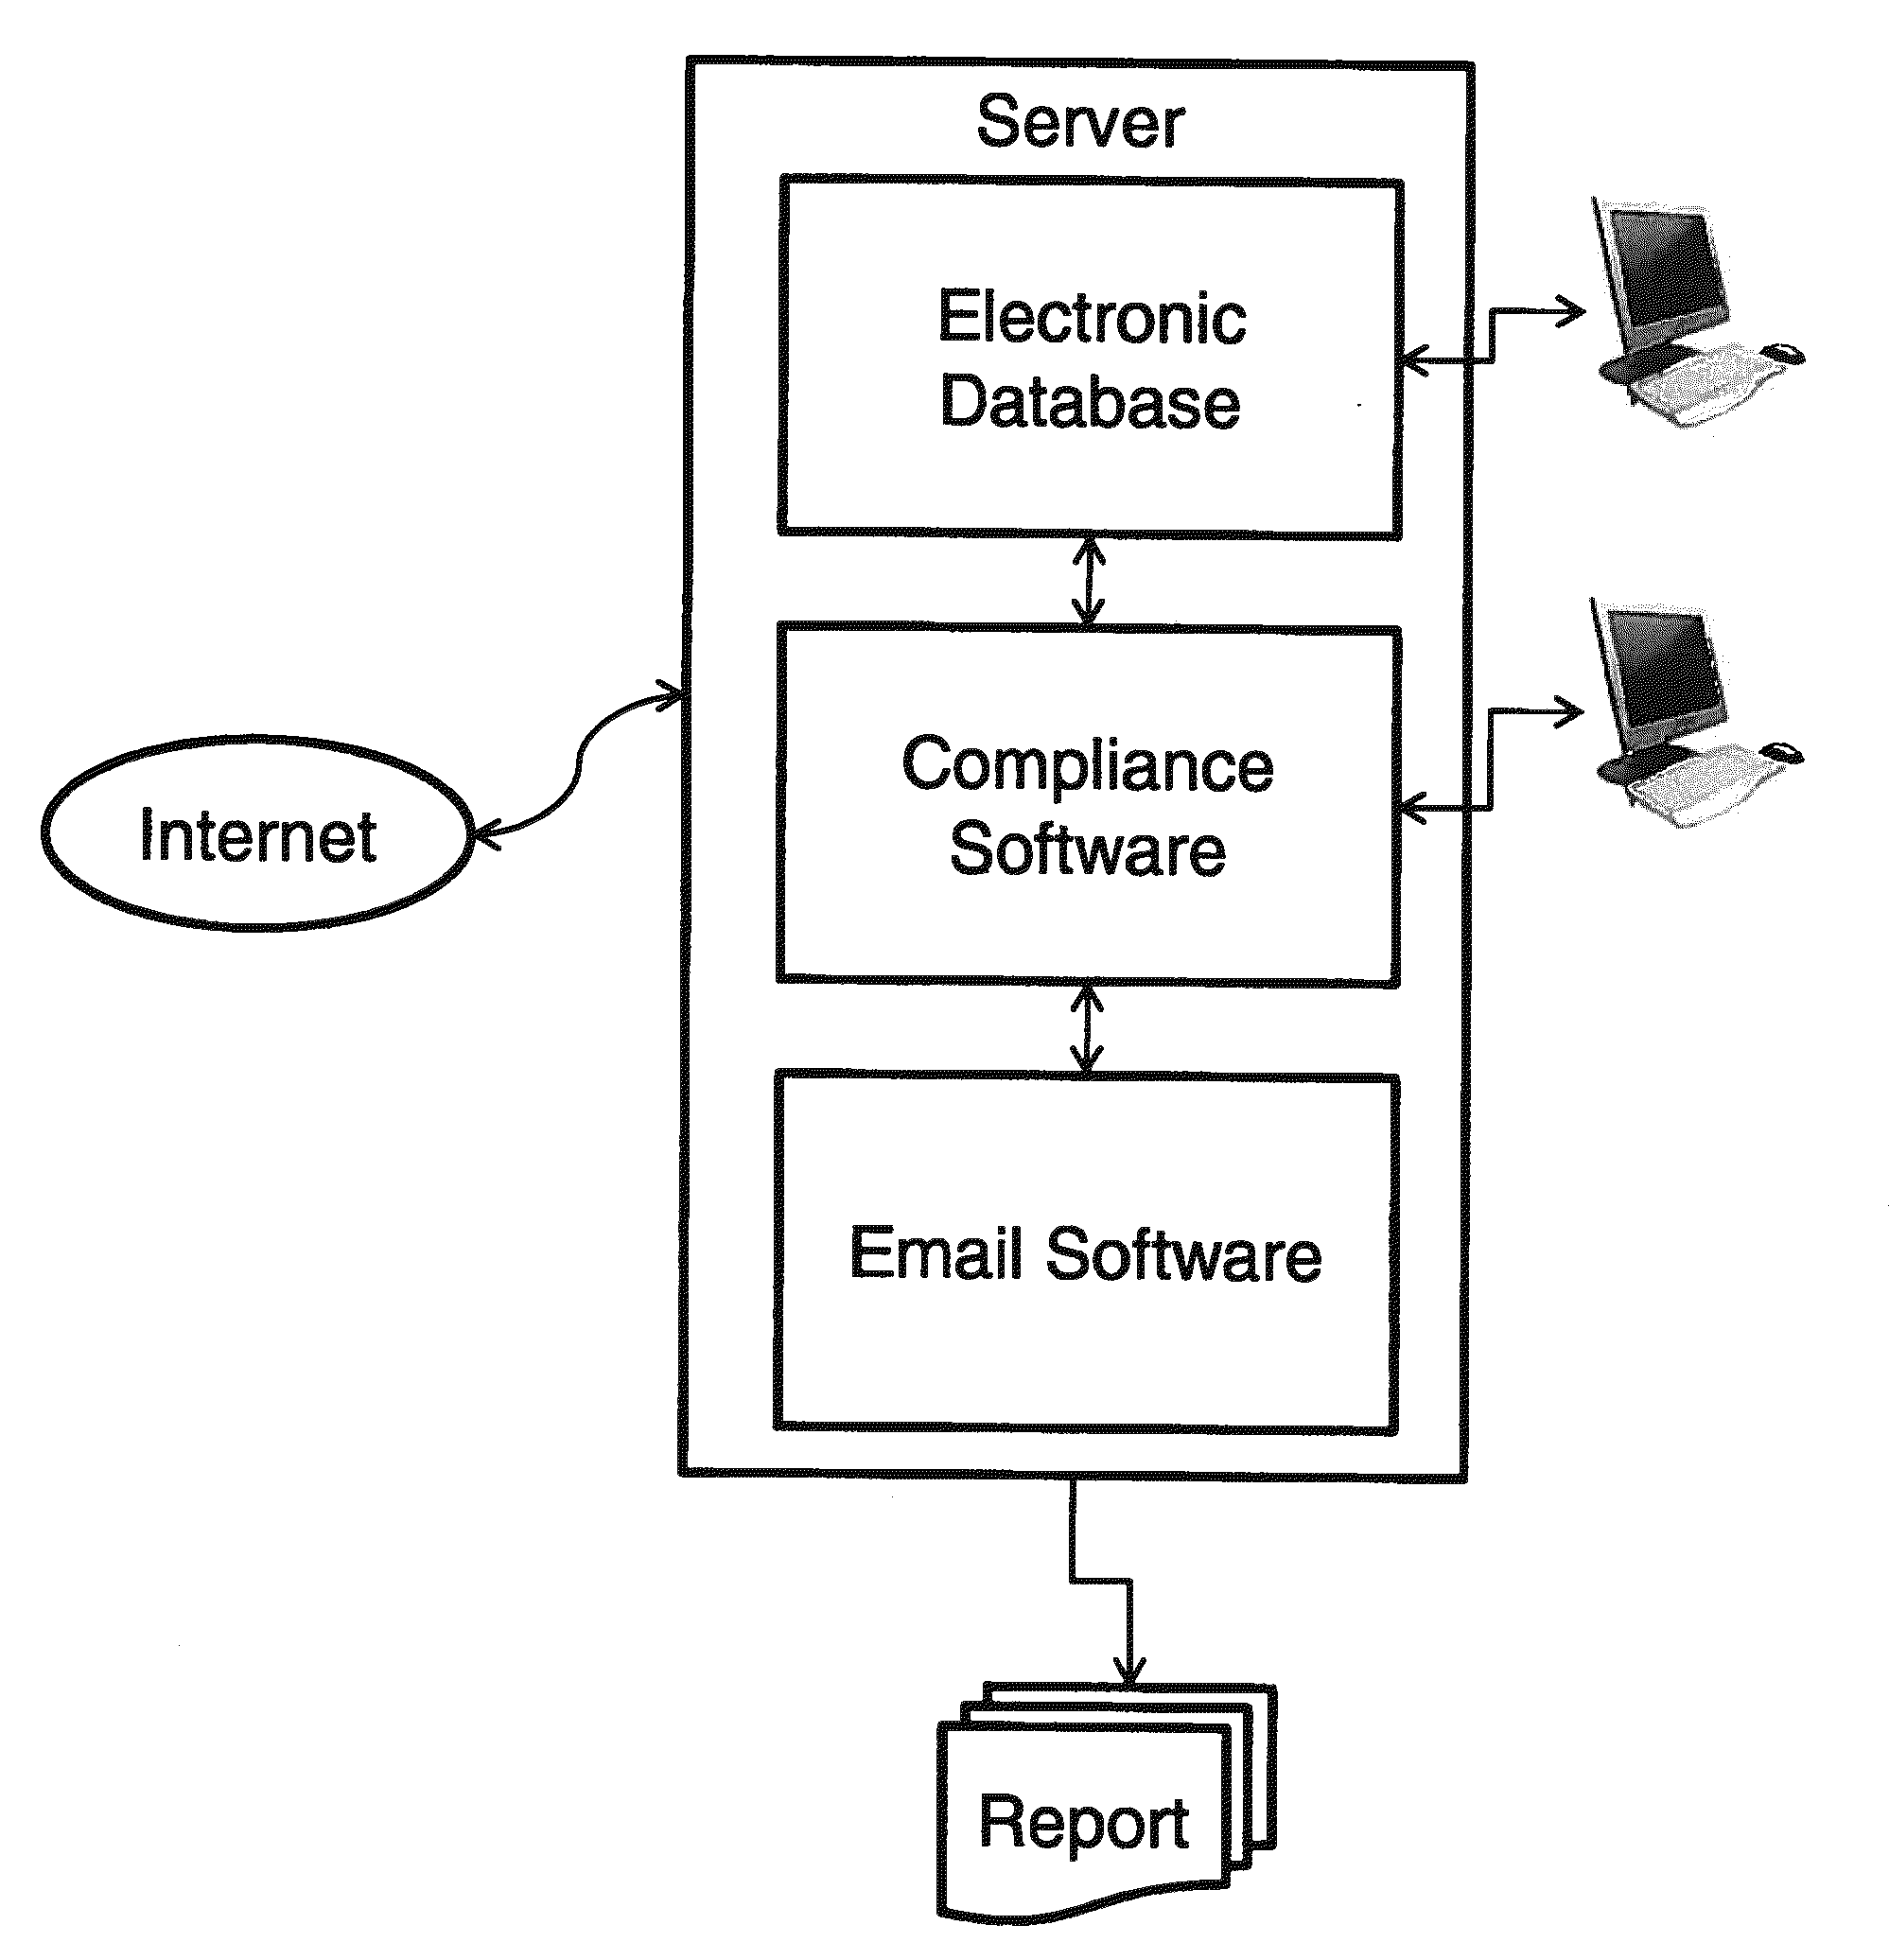 Method for establishing, tracking and auditing compliance